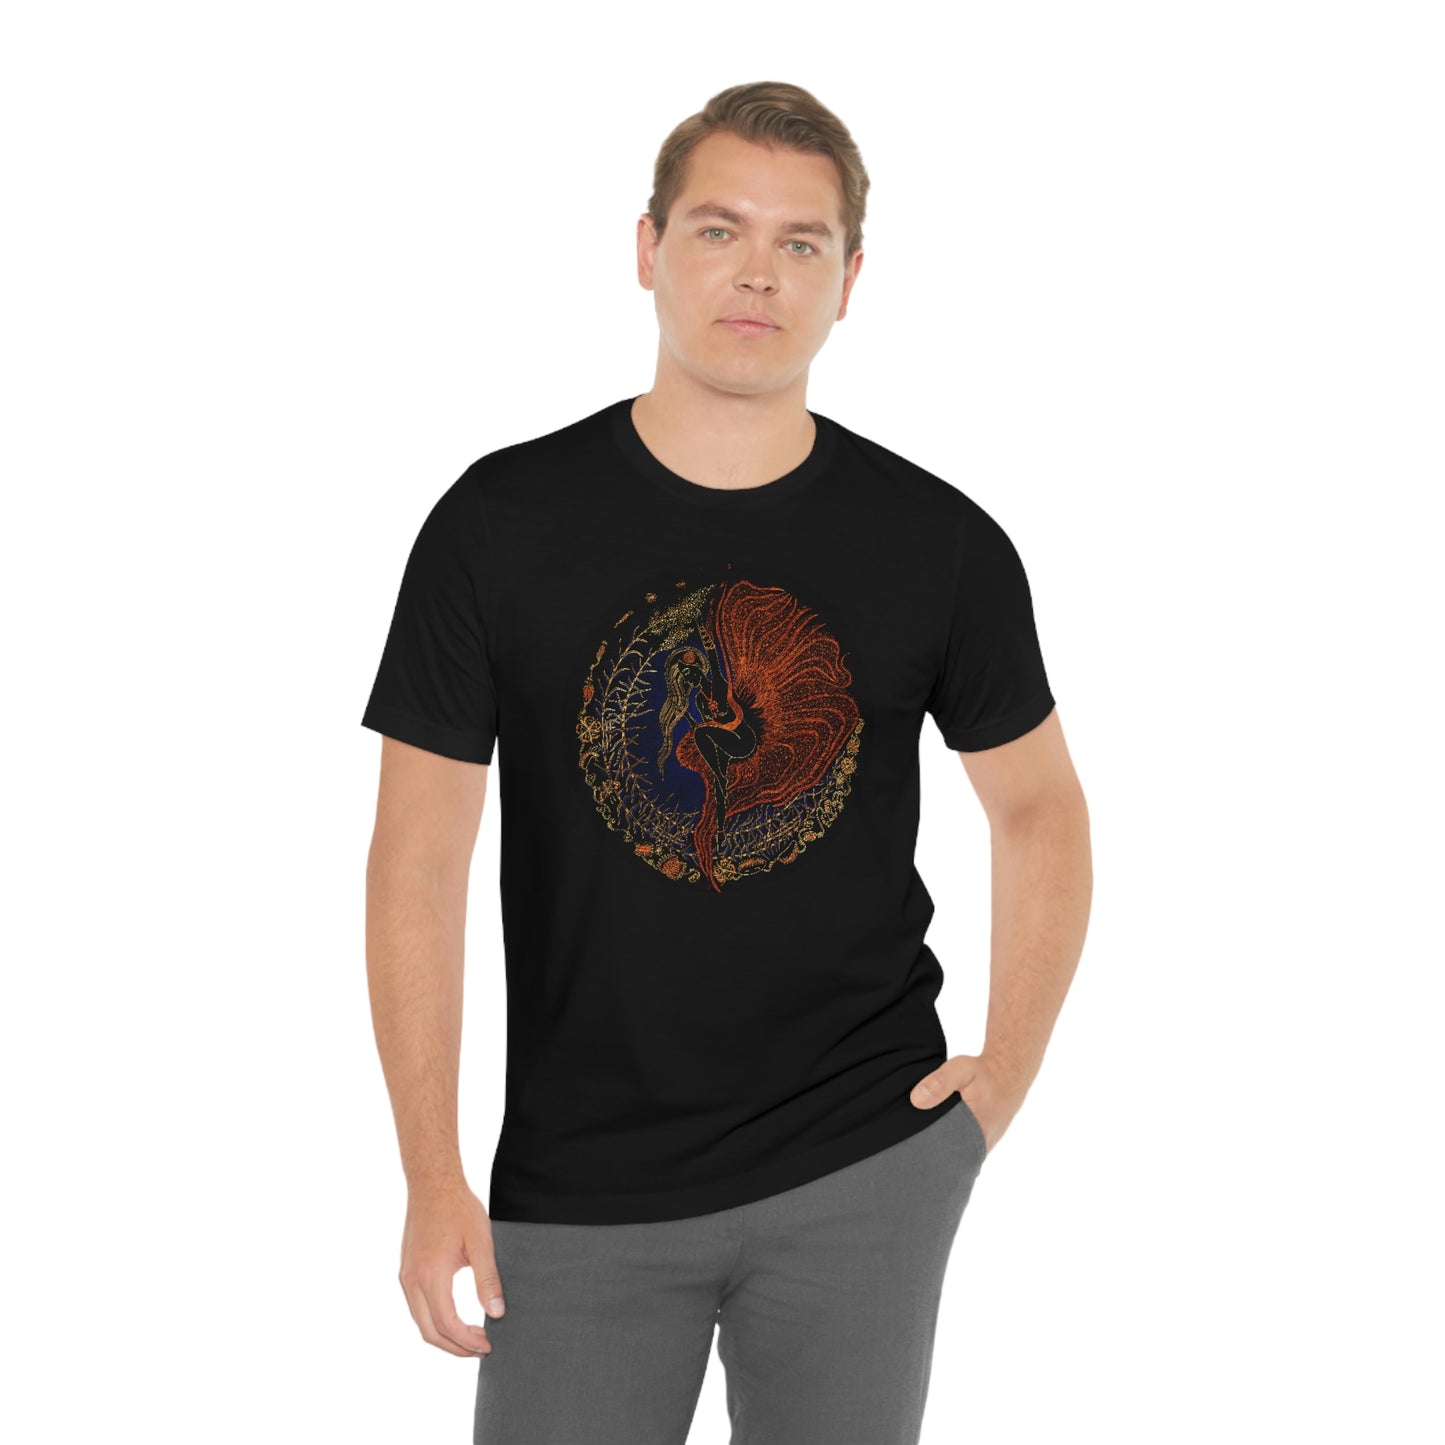 Chinese Zodiac Sign T Shirt (Rooster) Unisex Regular Fit